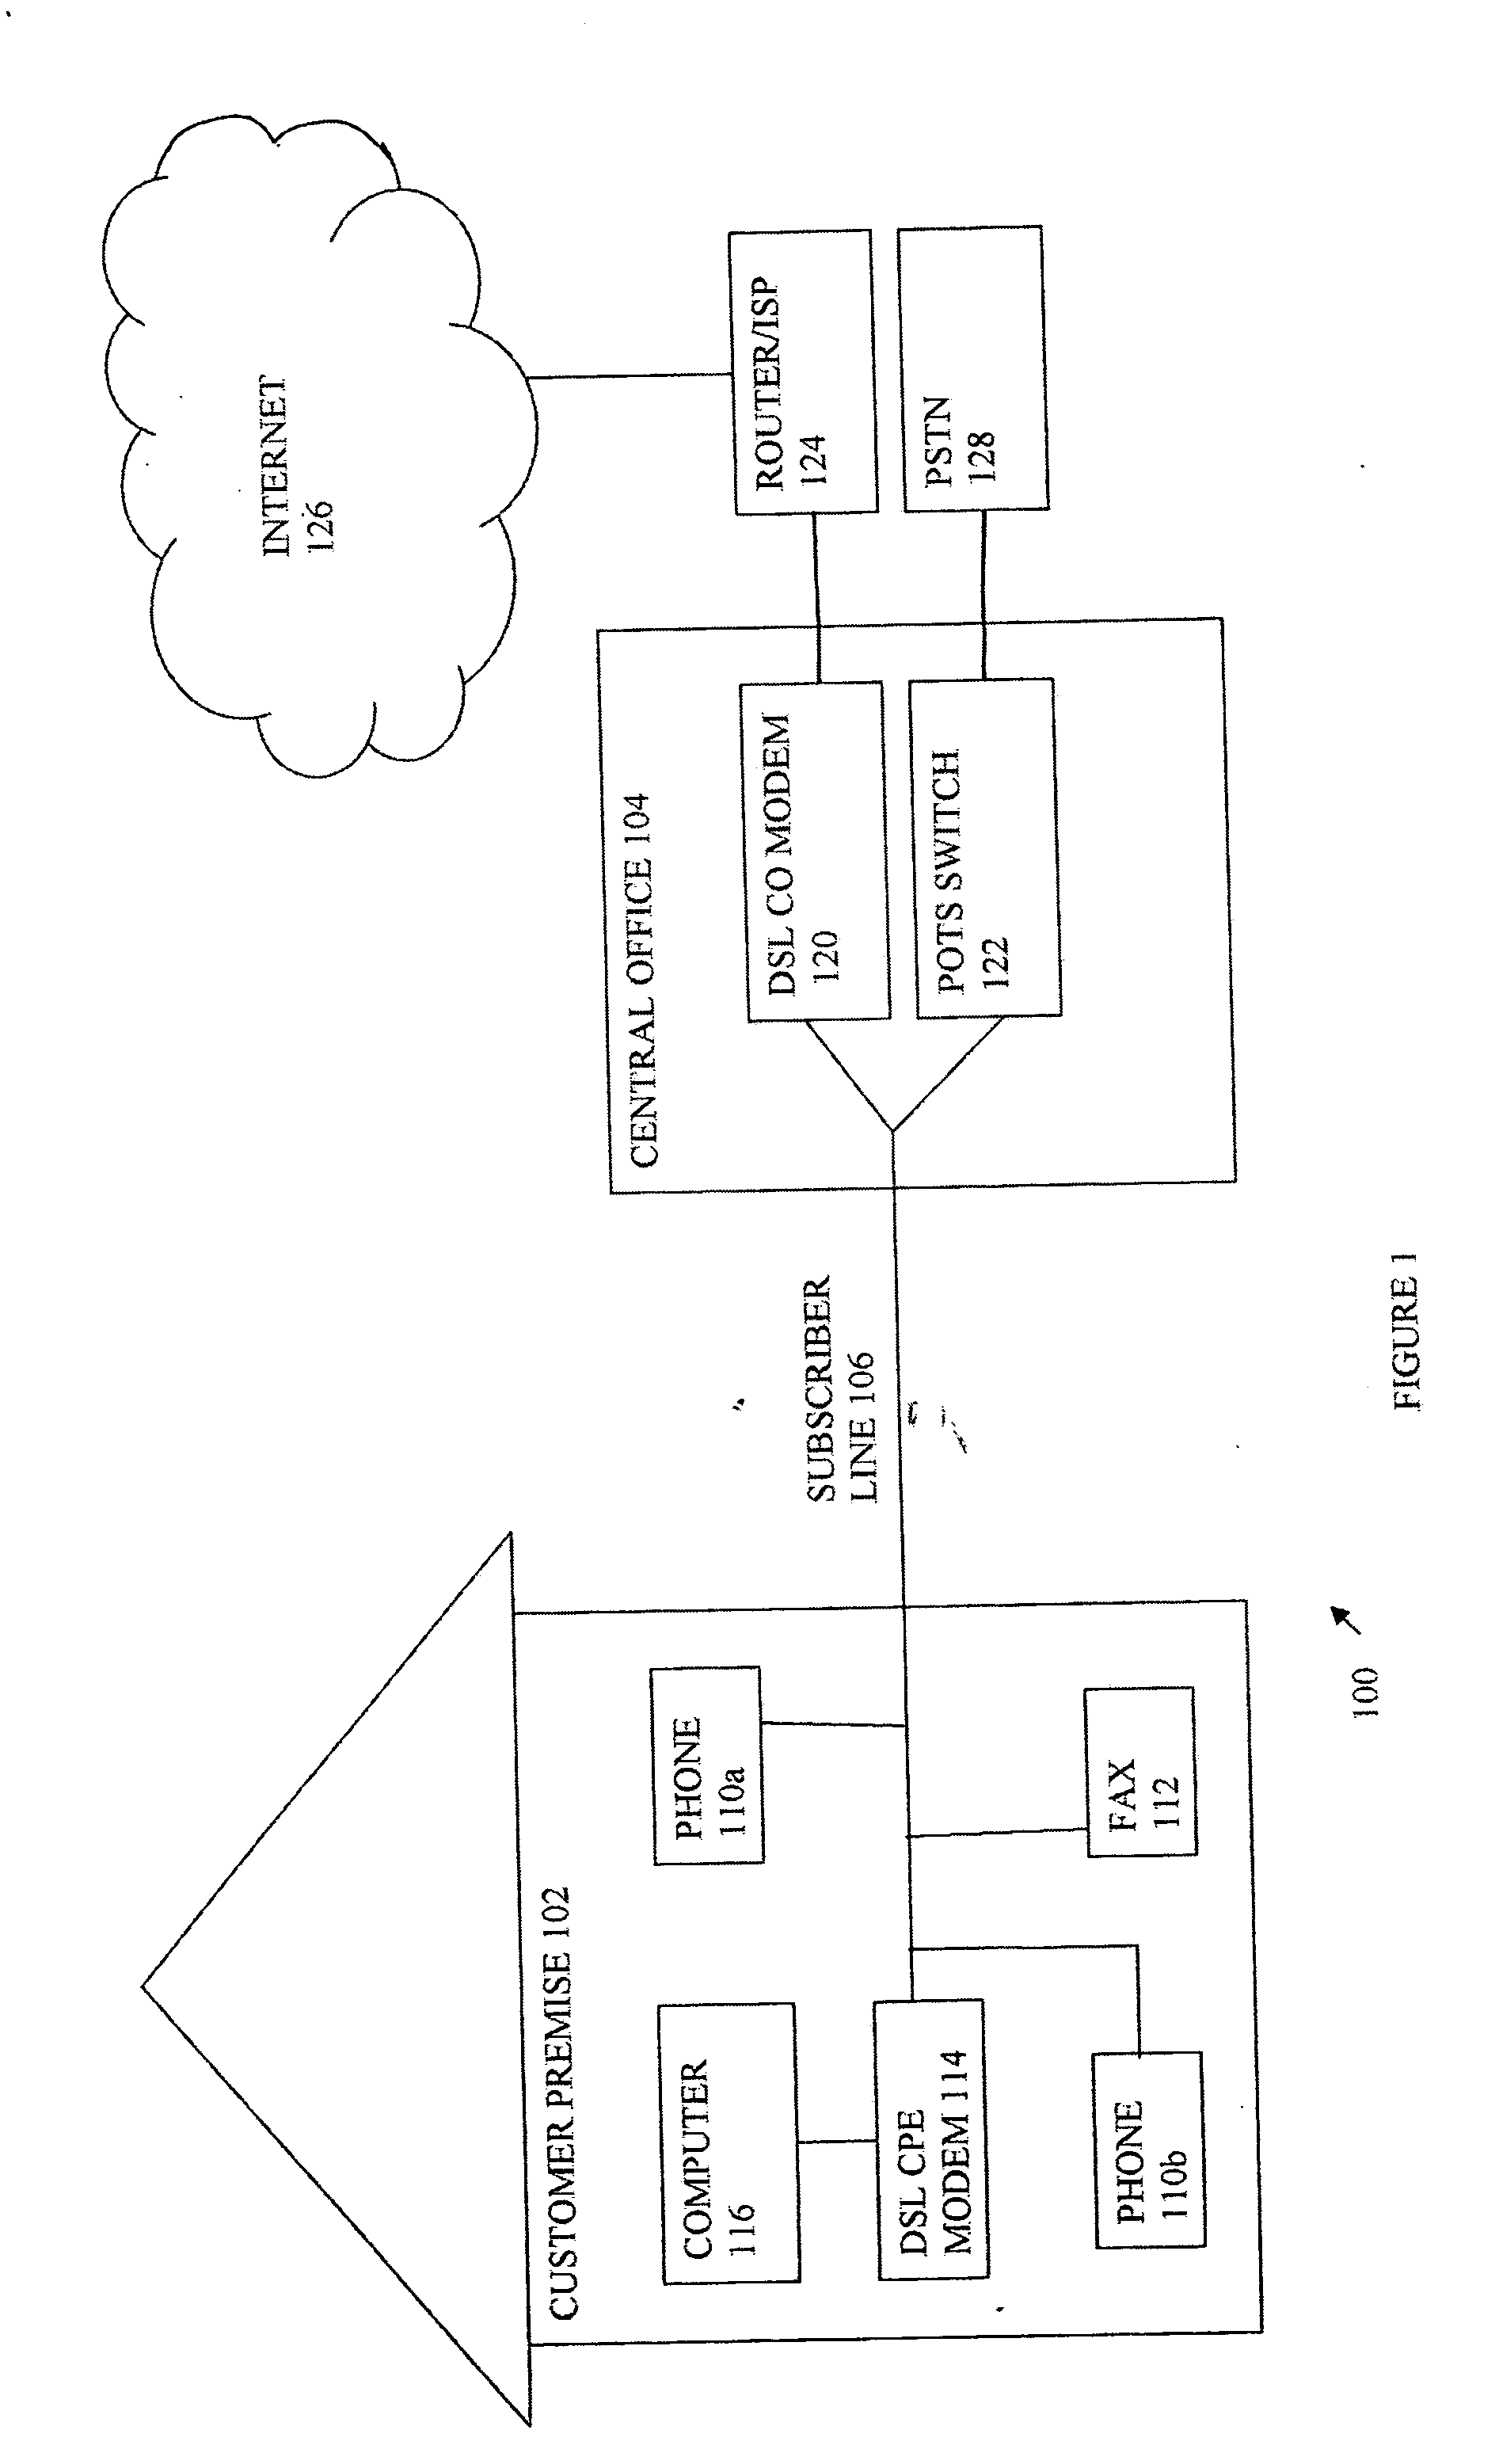 System and method for de-scrambling and bit-order-reversing payload bytes in an Asynchronous Transfer Mode cell